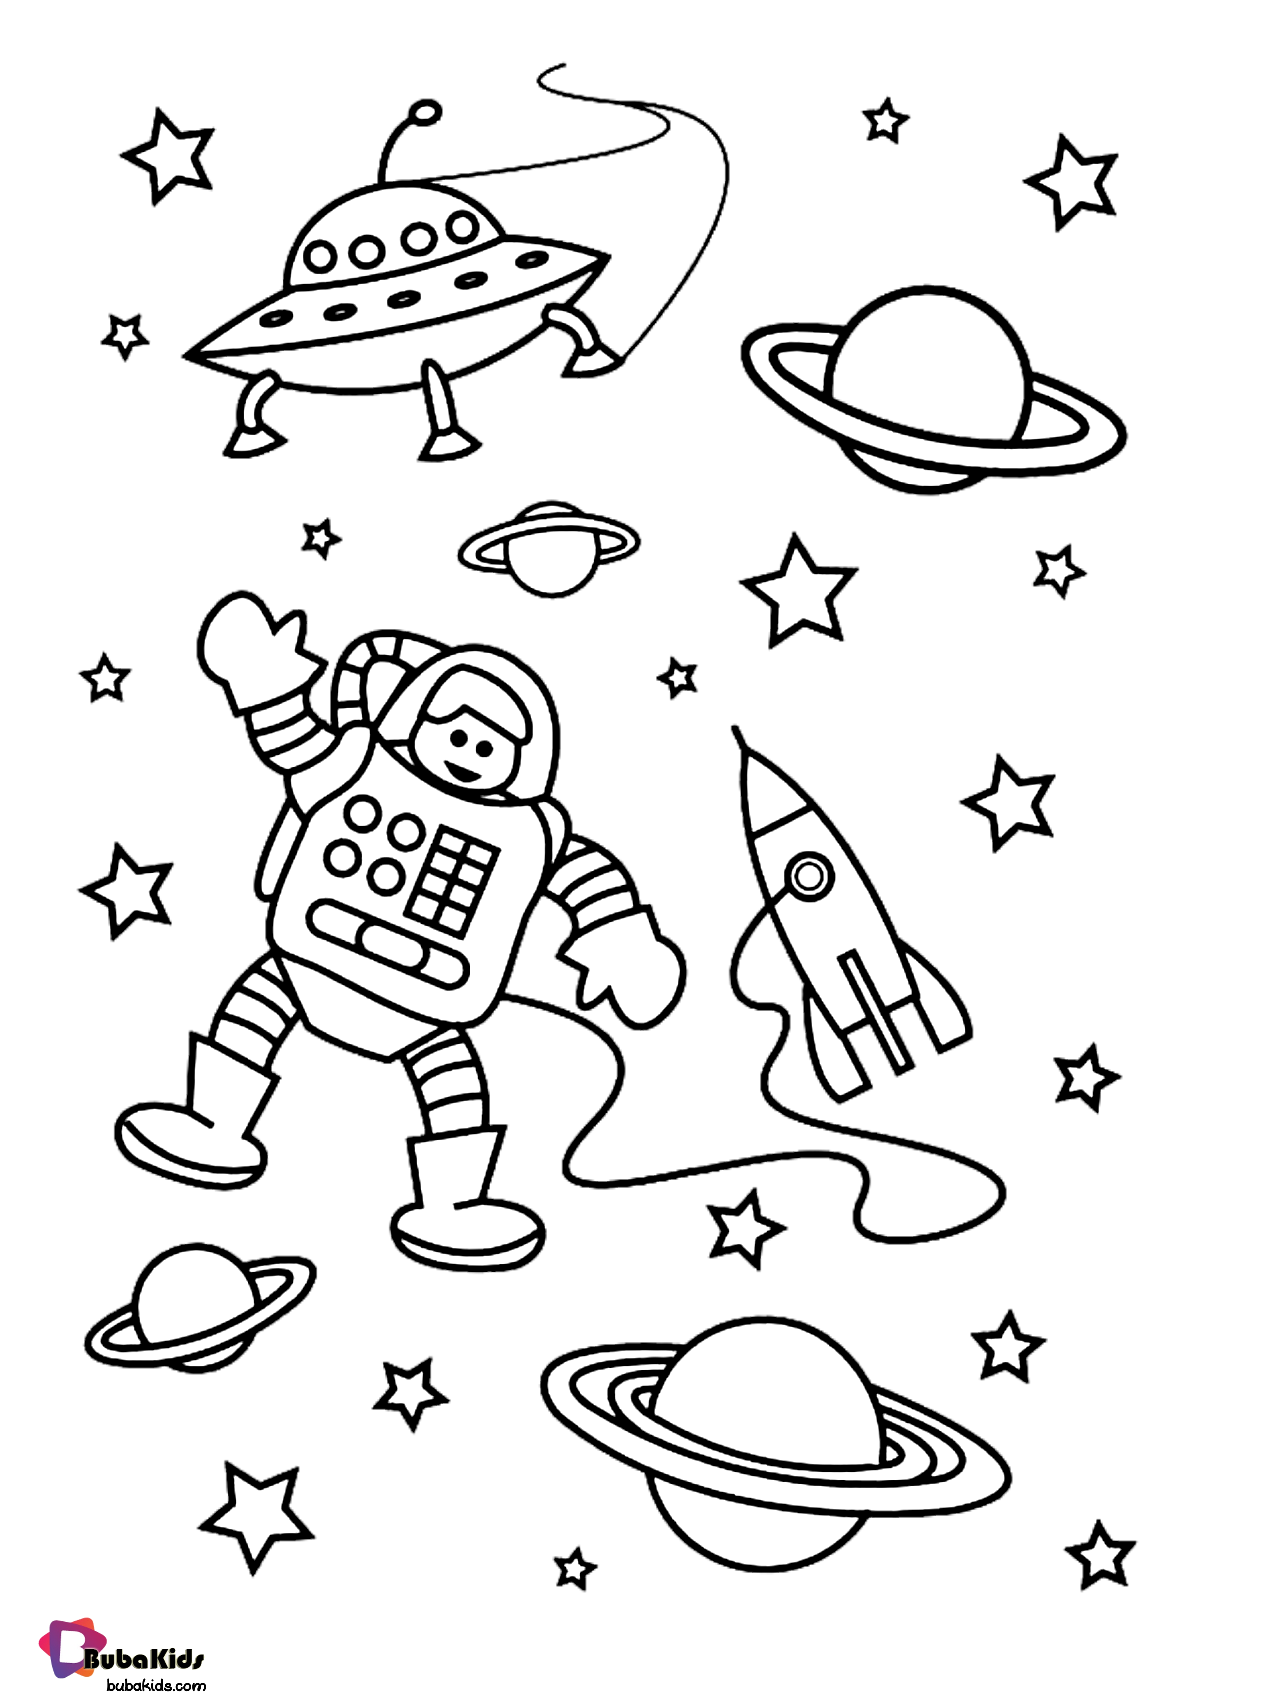 Astronaut in outer space coloring page - BubaKids.com